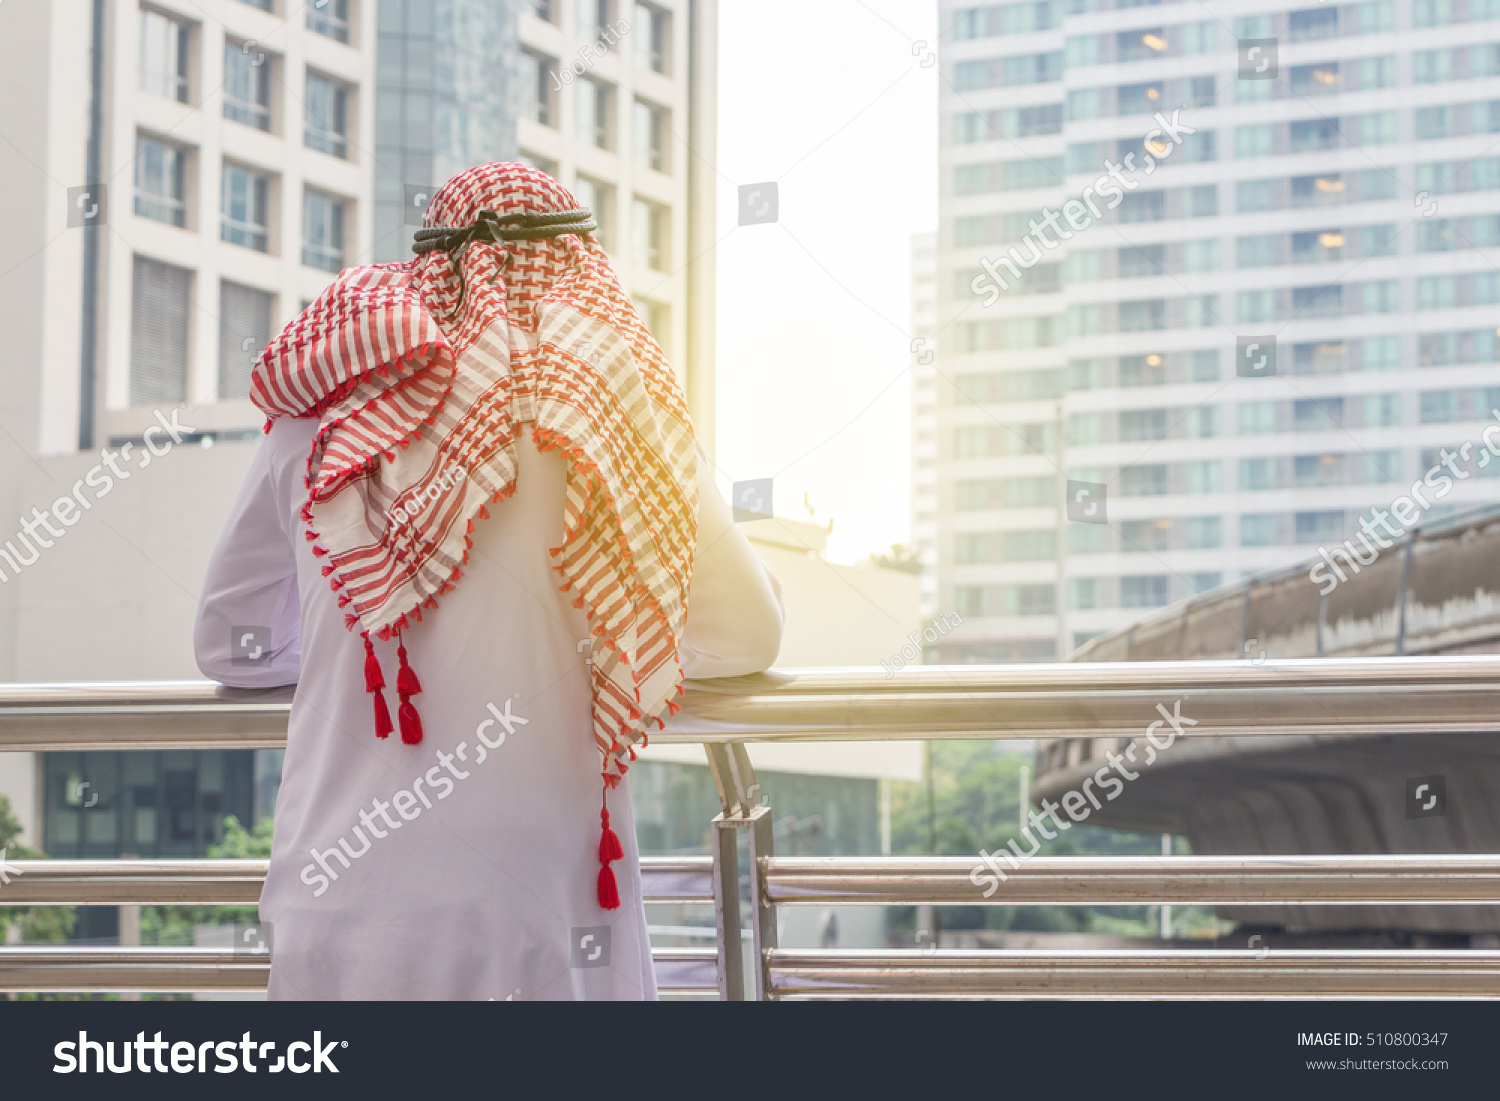 Arab businessman thinking or entrepreneur looking in the city #510800347